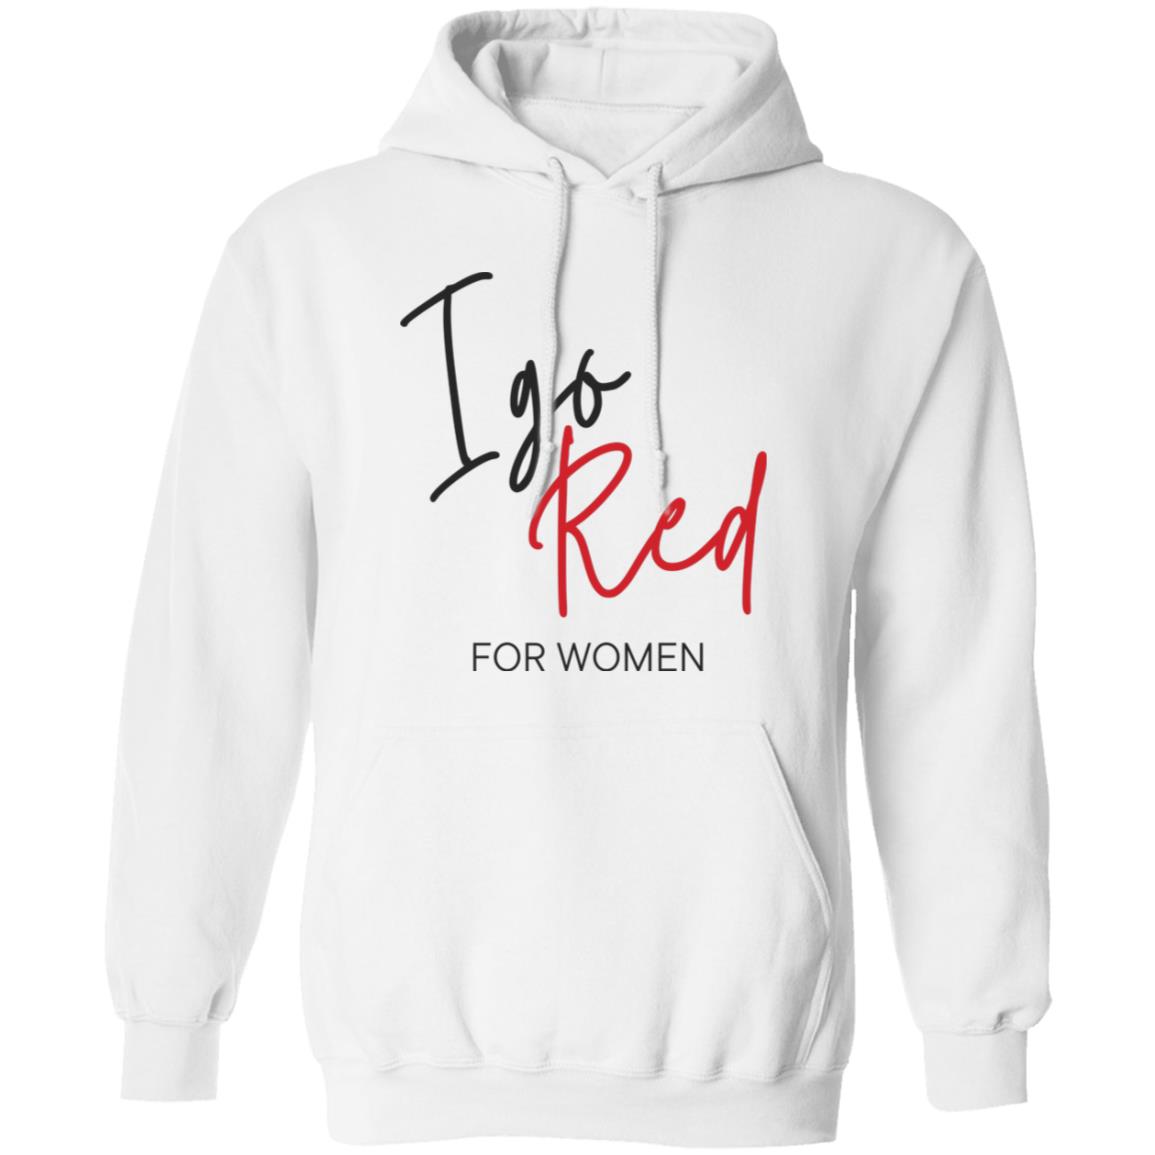 White hoodie that says "I Go Red for Women" on the front in stylized fonts.